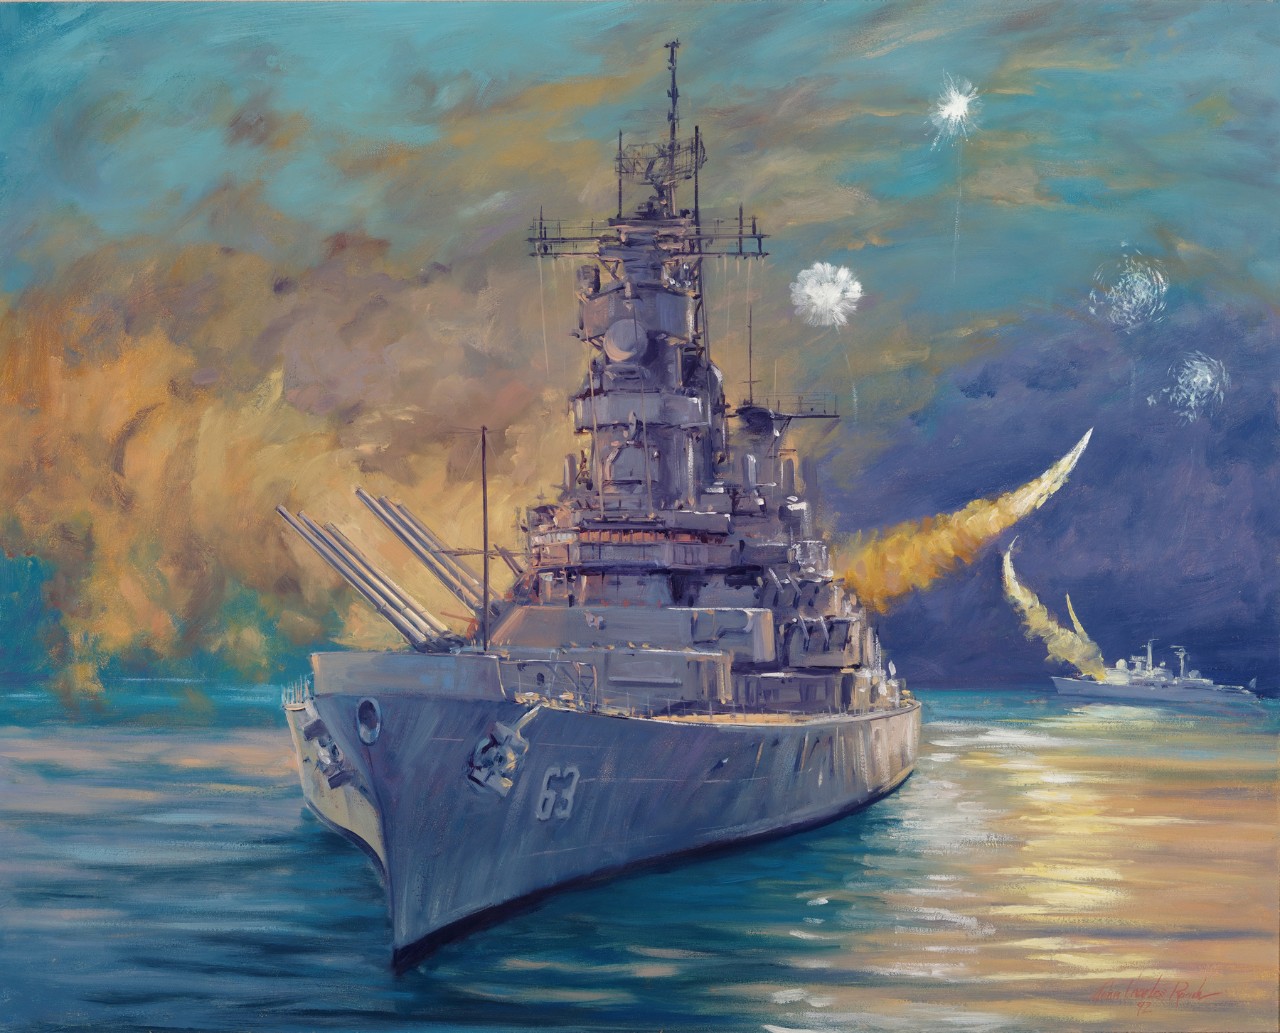 A battleship at night with missiles streaking through the sky